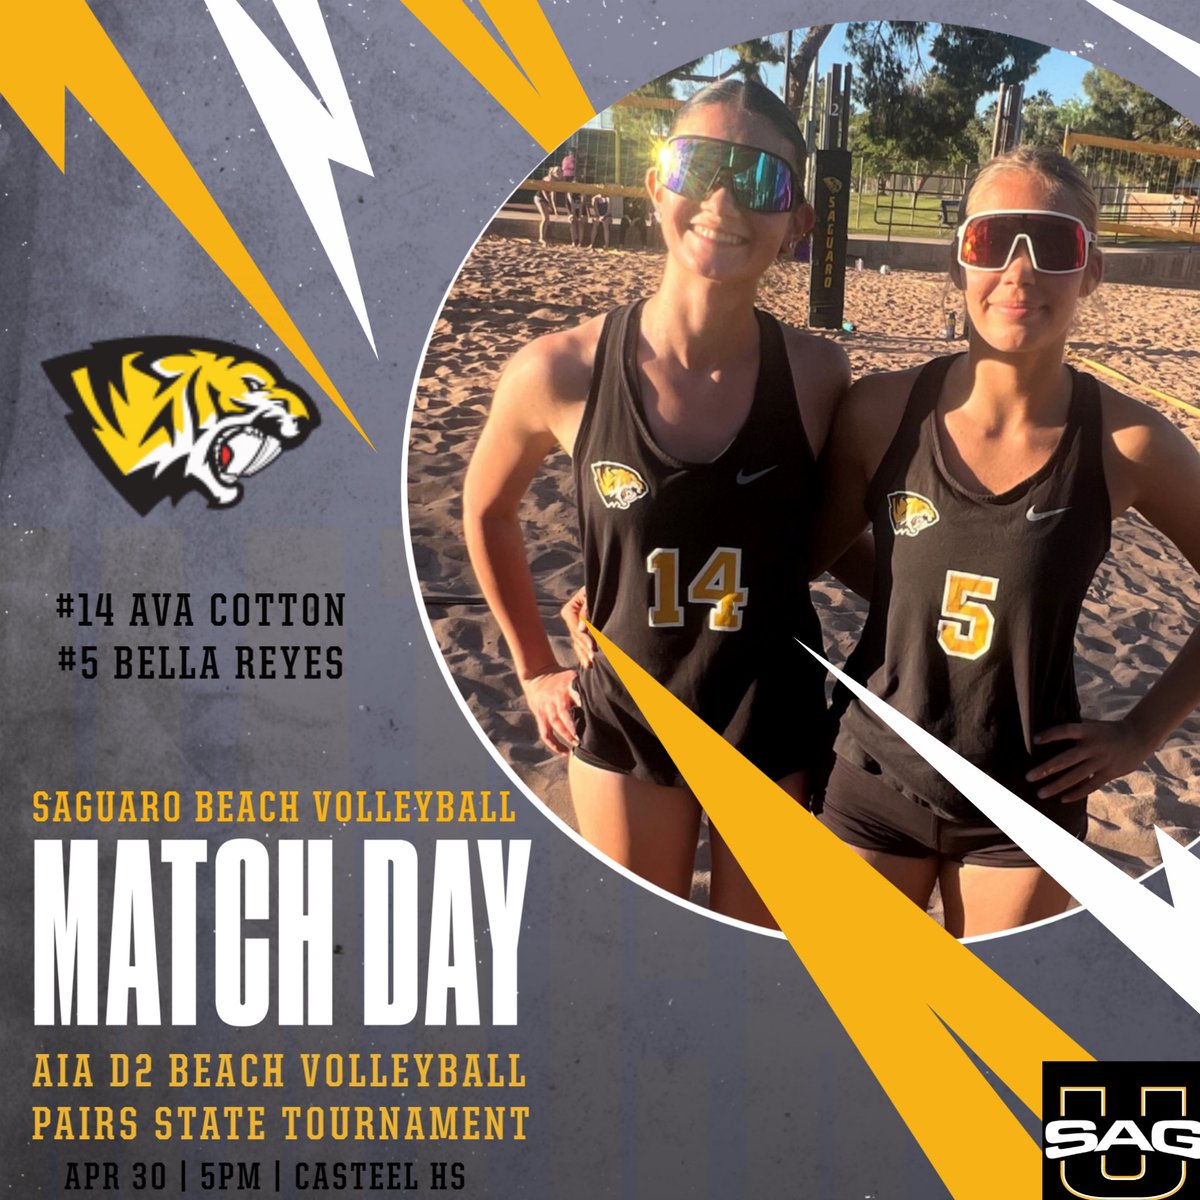 Good luck today to our Beach Volleyball @SaguaroVBL Girls Ava Cotton and Bella Reyes competing today in the AIA Beach VolleyballDivision II State Pairs Championship. #SagU #Family azpreps365.com/brackets/volle…